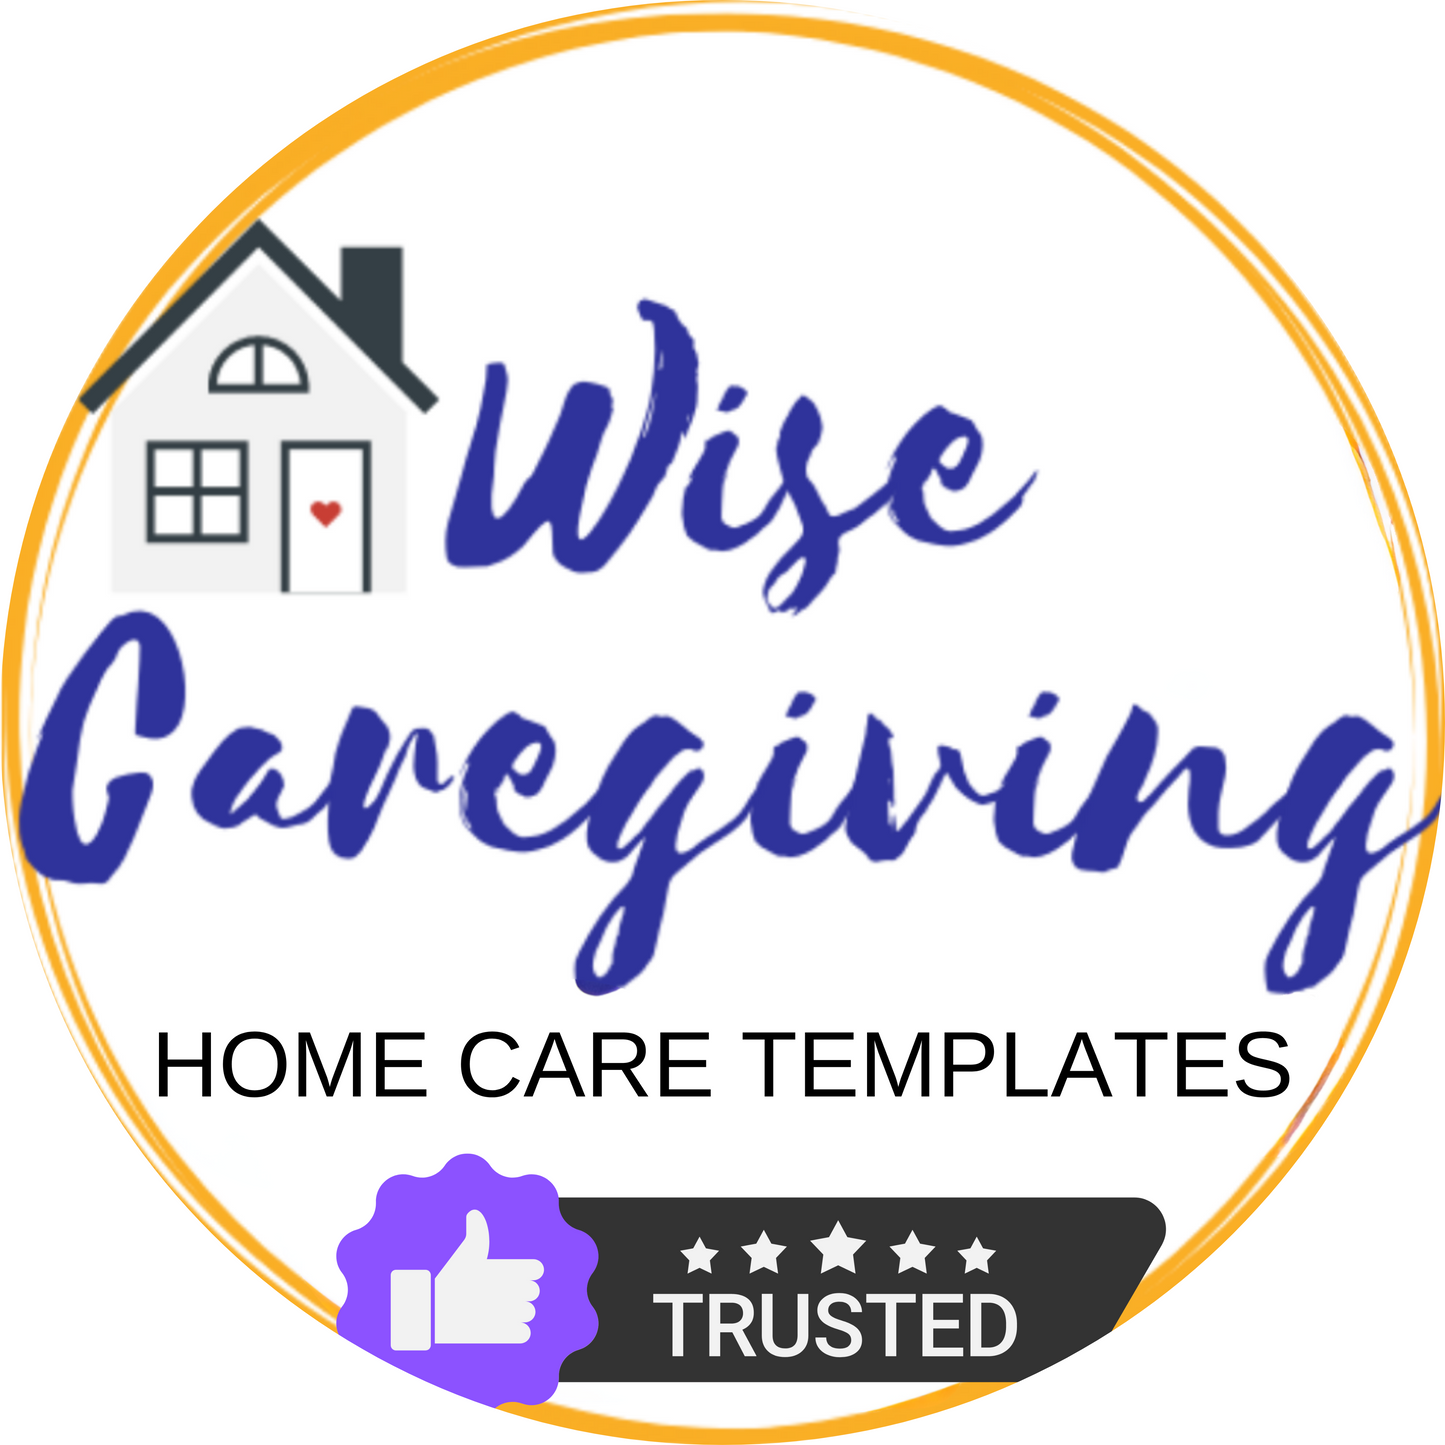 Clients Rights and Responsibilities Home Care Template